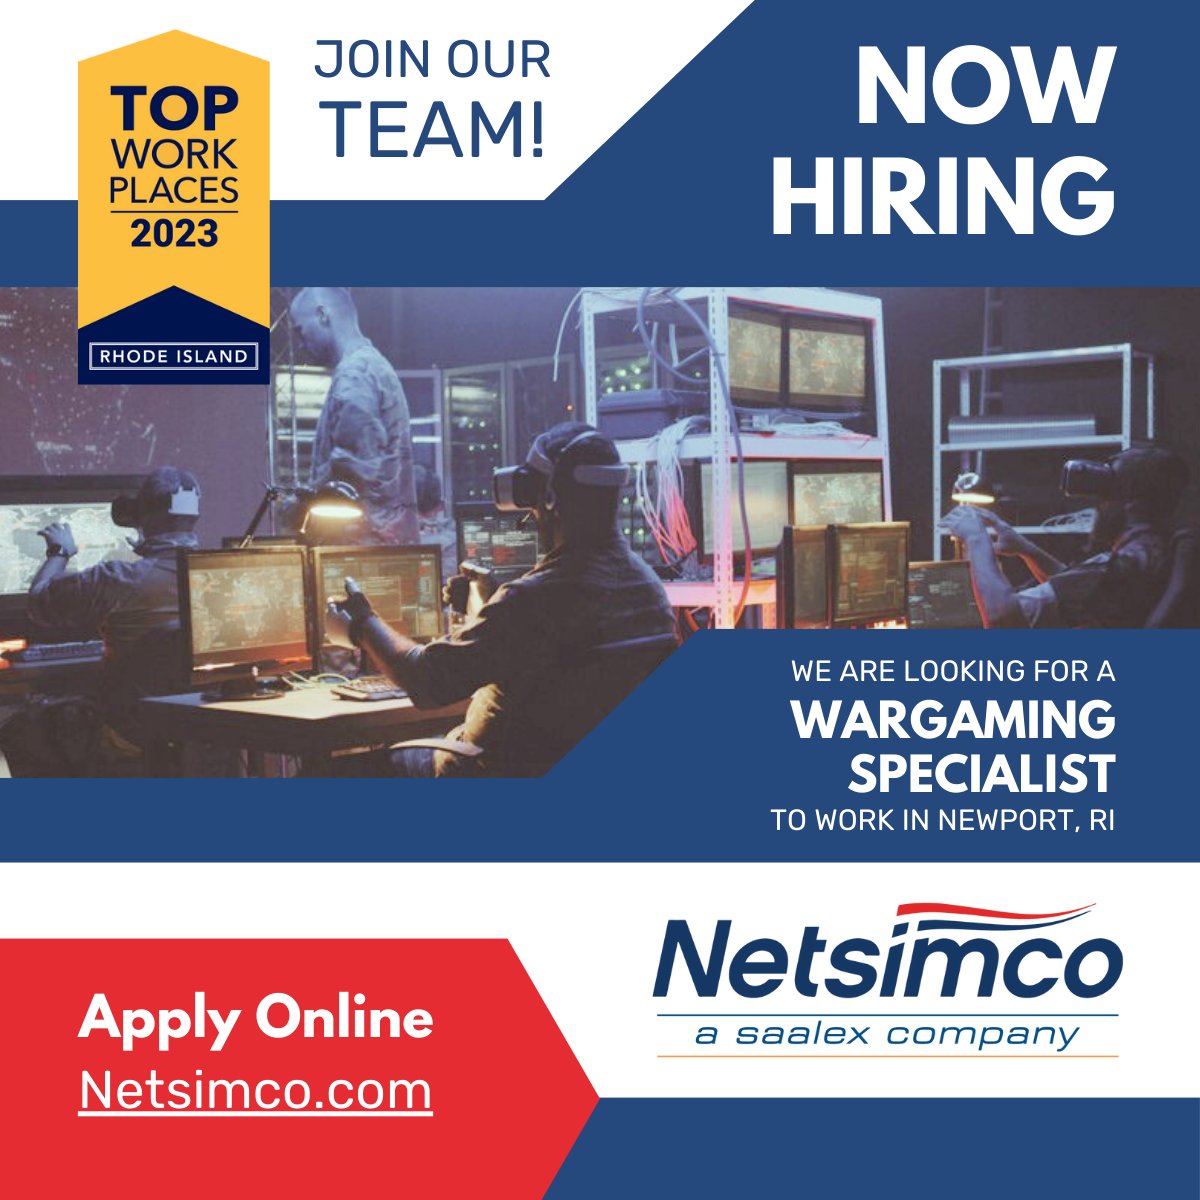 #ApplyNow Netsimco is offering an opportunity for a Wargaming Specialist for the Naval War College in Newport, RI.  #WargamingSpecialist #NavalWarCollege #NewportRI #DefenseJobs #WarfareSimulation #transitioningmilitary #VeteransEmployment #TopWorkplaces
ow.ly/yeIo50QXk72